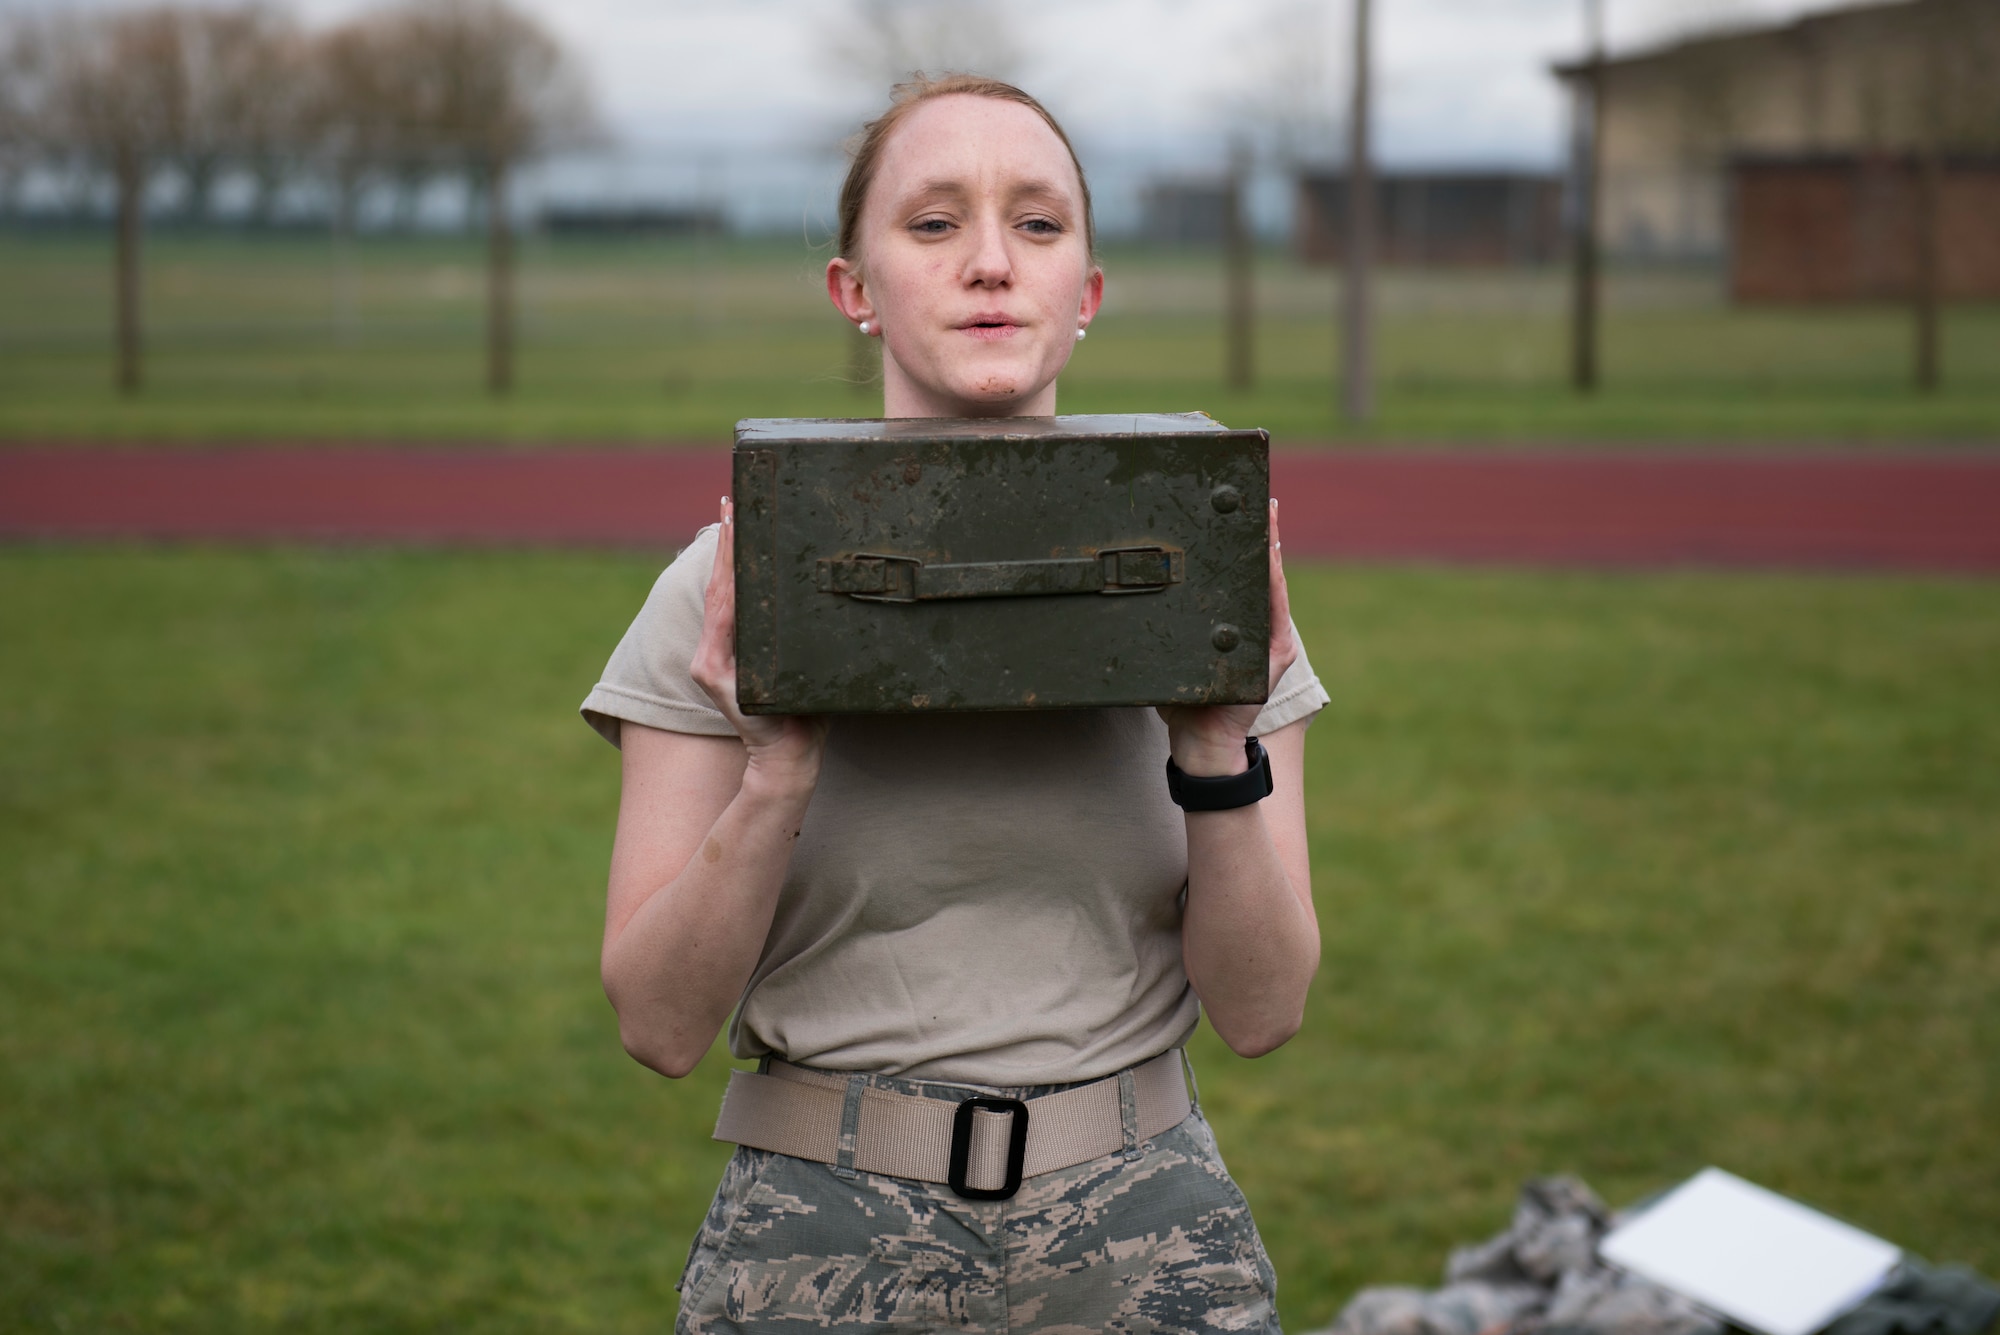 U.S. Air Force Staff Sgt. Haley Bradshaw, 423rd Force Support Squadron commander support staff technician, lifts an ammunition can during a practice Marine Corps Combat Fitness Test at the Joint Immersion Day at RAF Alconbury, England, Feb. 20, 2020. Joint Immersion Day was an opportunity for Air Force, Army, Marines and Navy, to come together to learn about each branch’s history, culture, structure and evaluations, in order to be aware of our similarities, differences, and needs in a joint environment. (U.S. Air Force photo by Airman 1st Class Jennifer Zima)